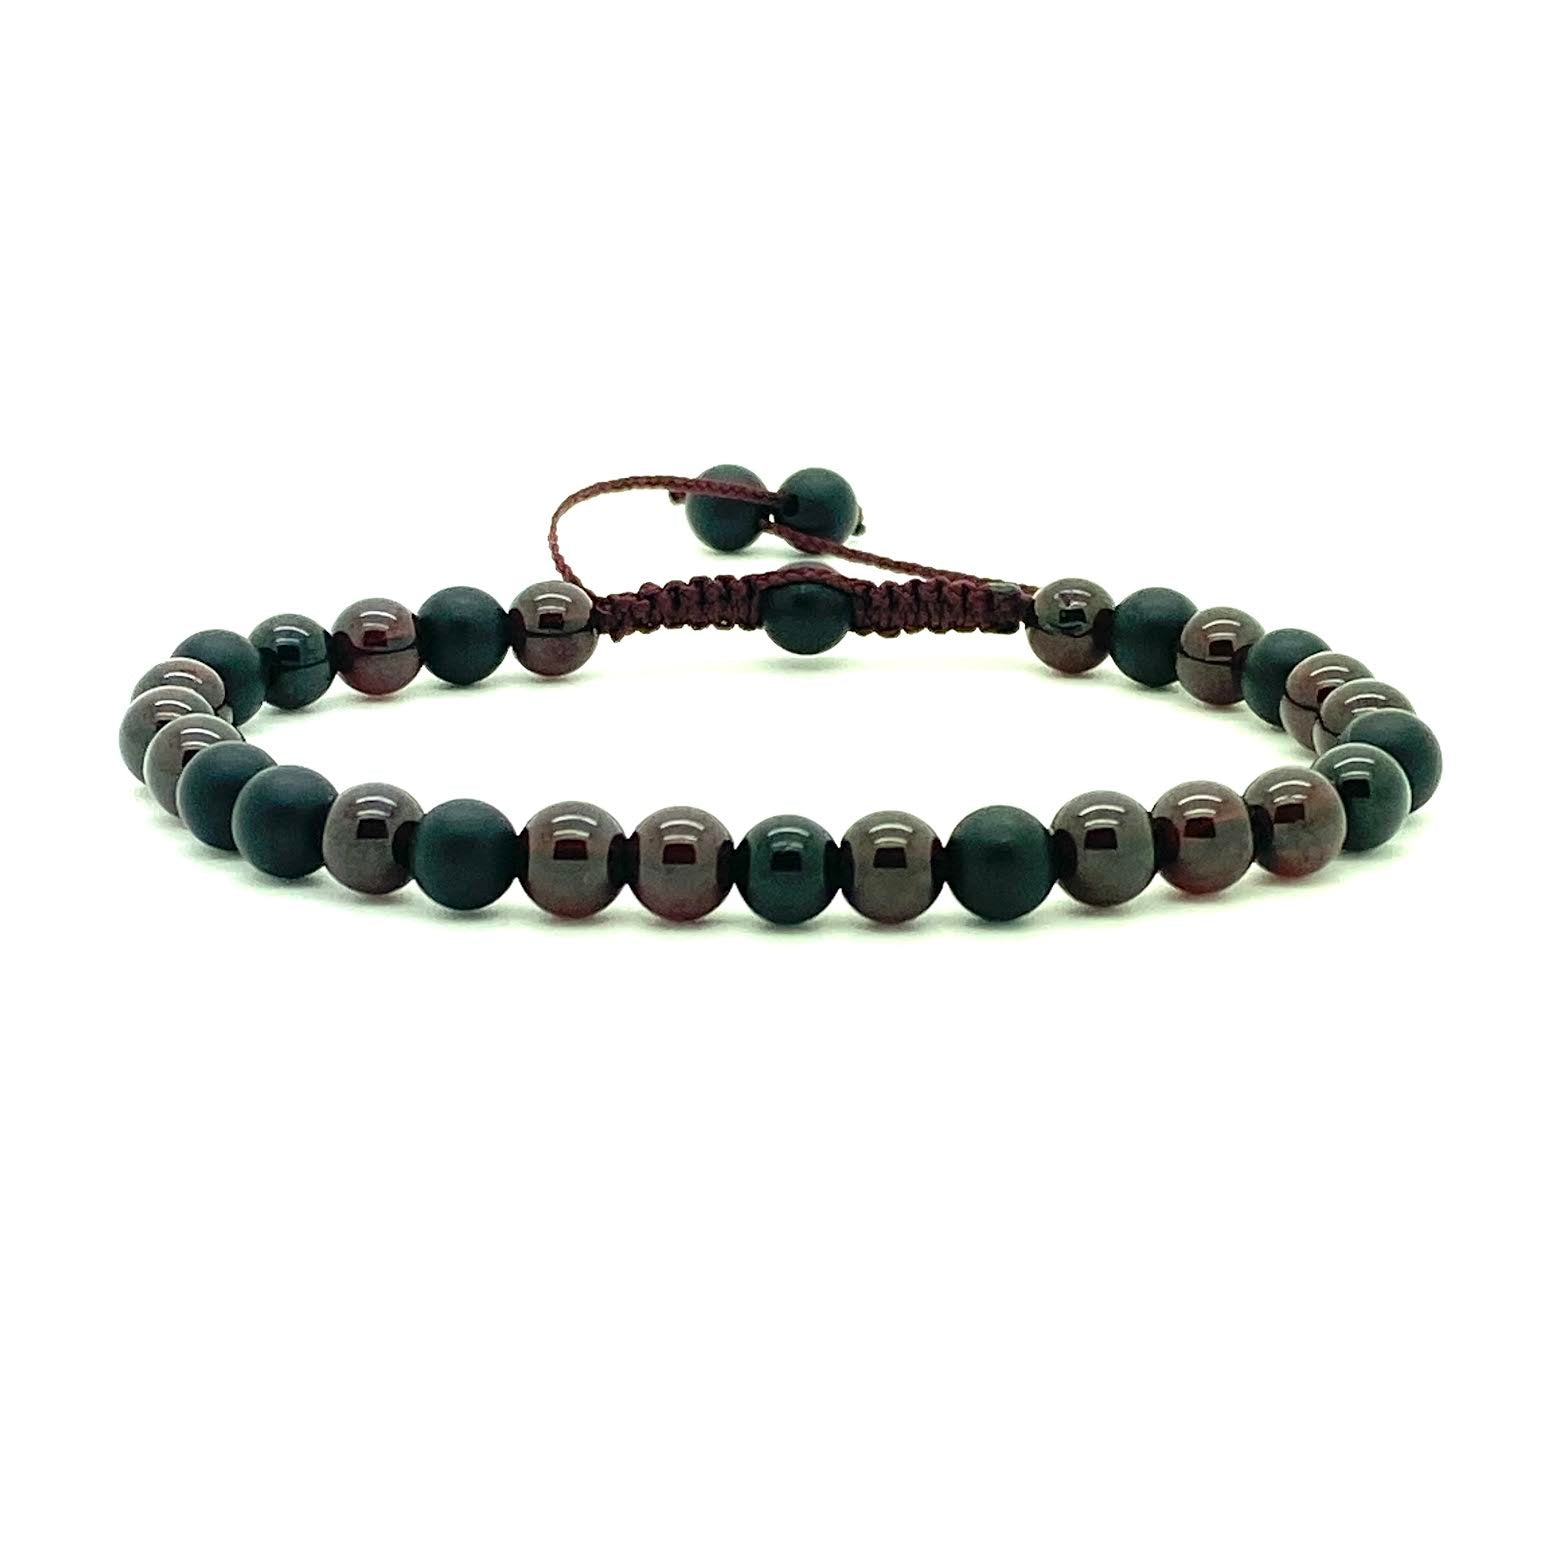 Trendy Red Garnet beads accented with black onyx beads. Hand knotted adjustable cord for a perfect fit. Made by WristBend